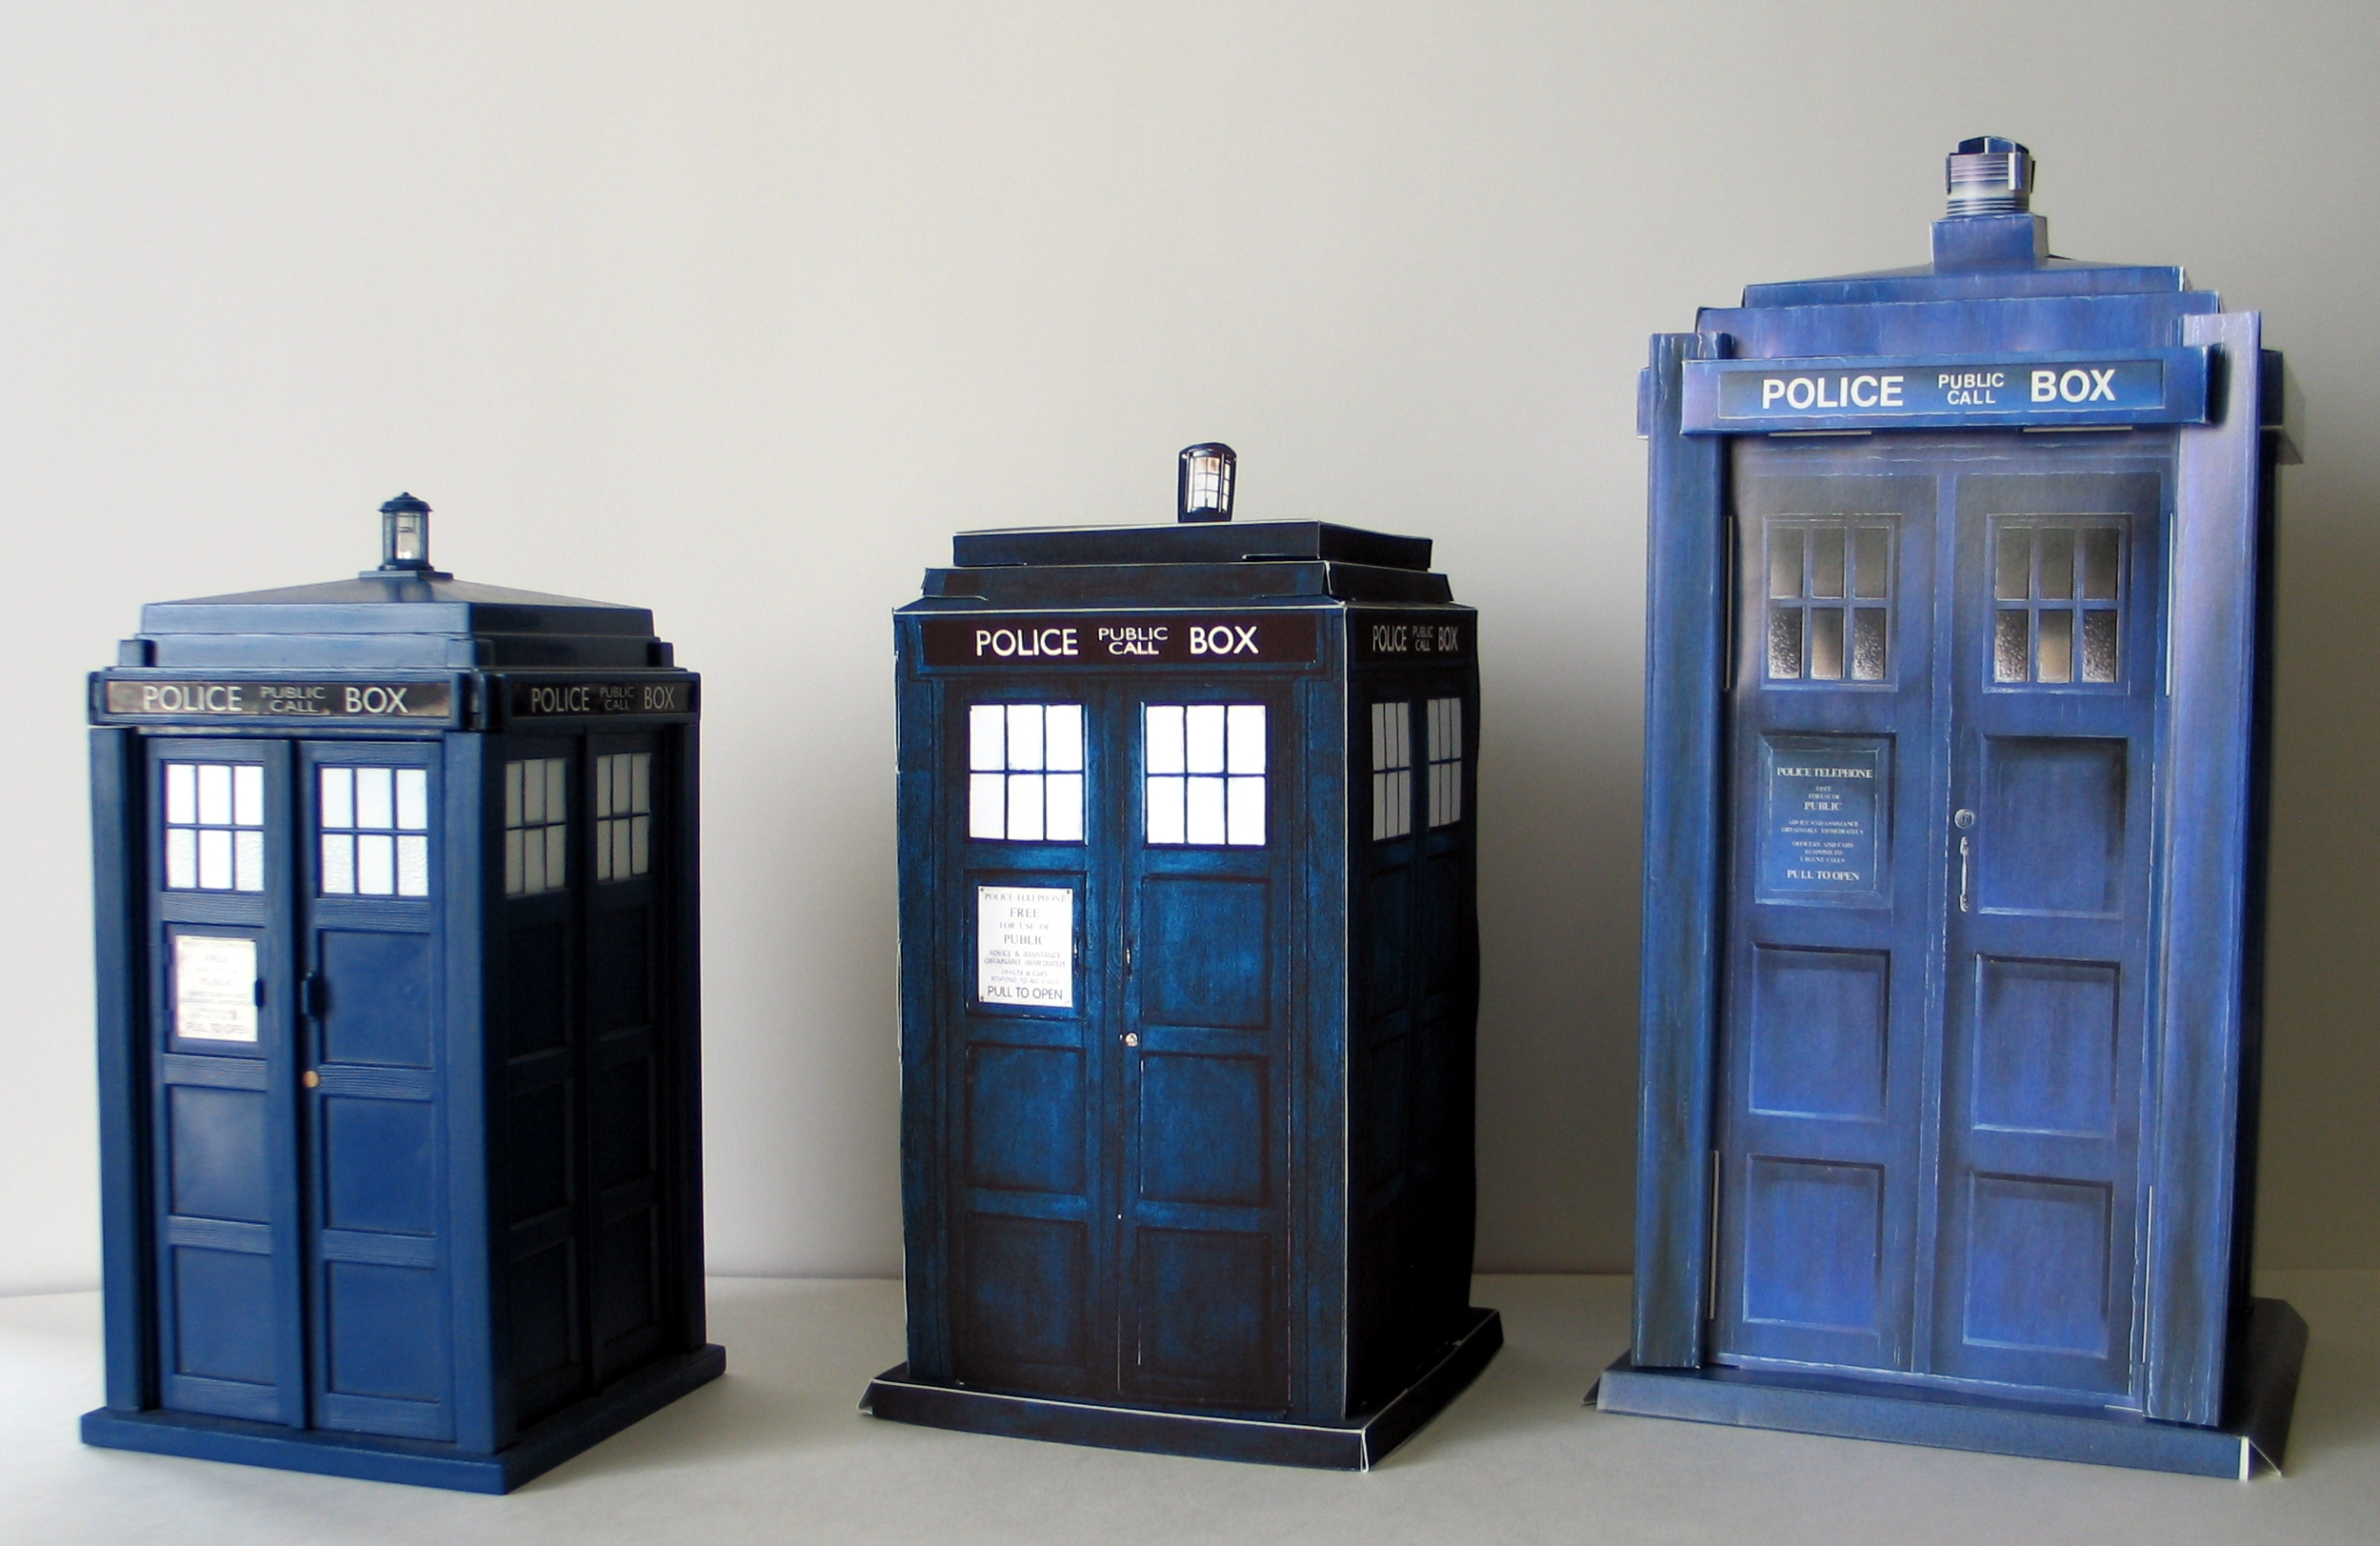 DR WHO ACTION FIGURES & FLIGHT CONTROL TARDIS 10TH & 11TH DOCTOR ERA TOYS 9TH 